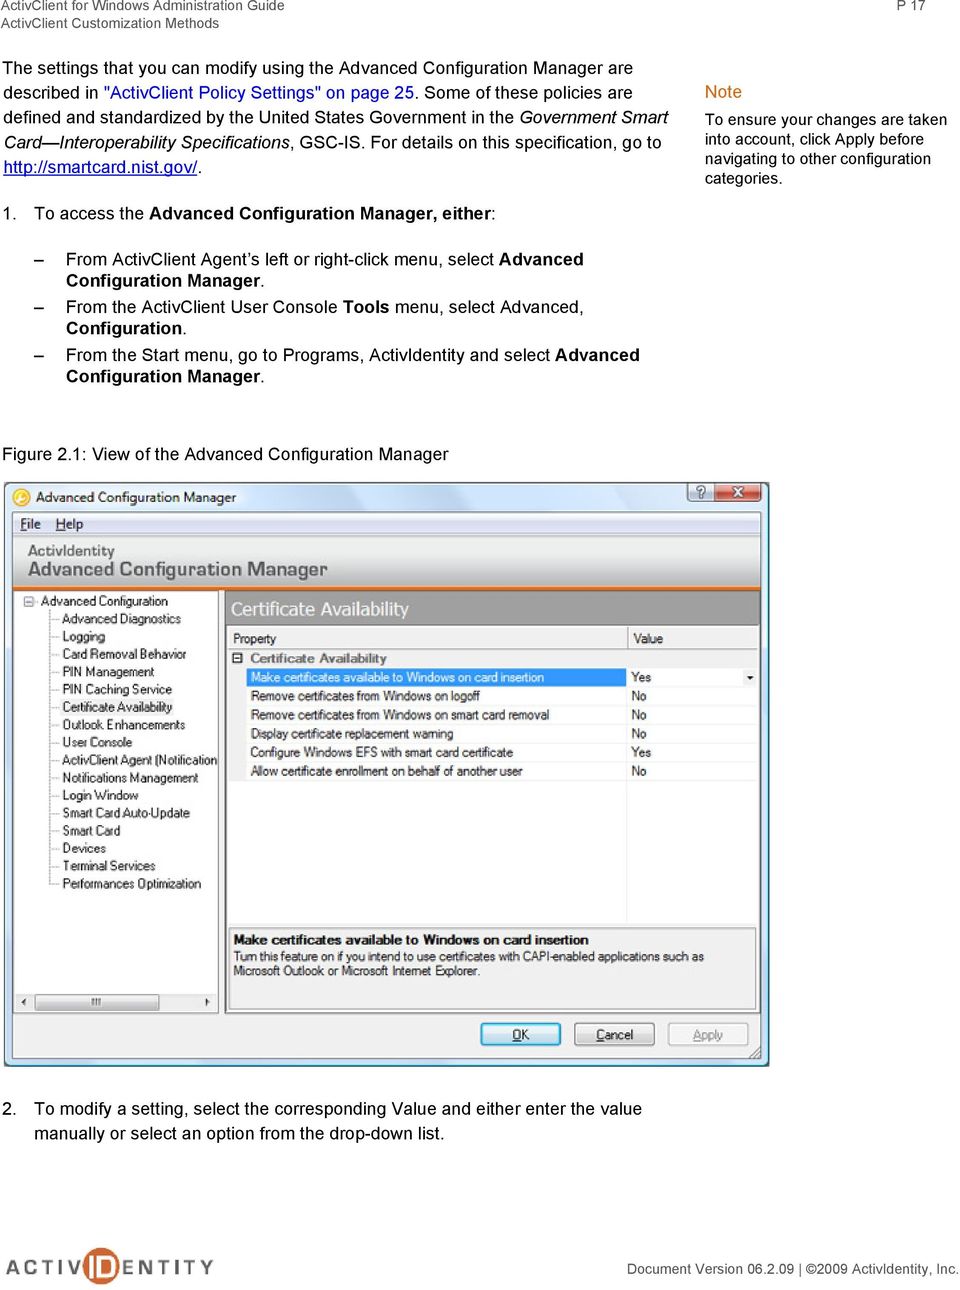 activclient 6.2 and 7.1 cac and piv version for windows